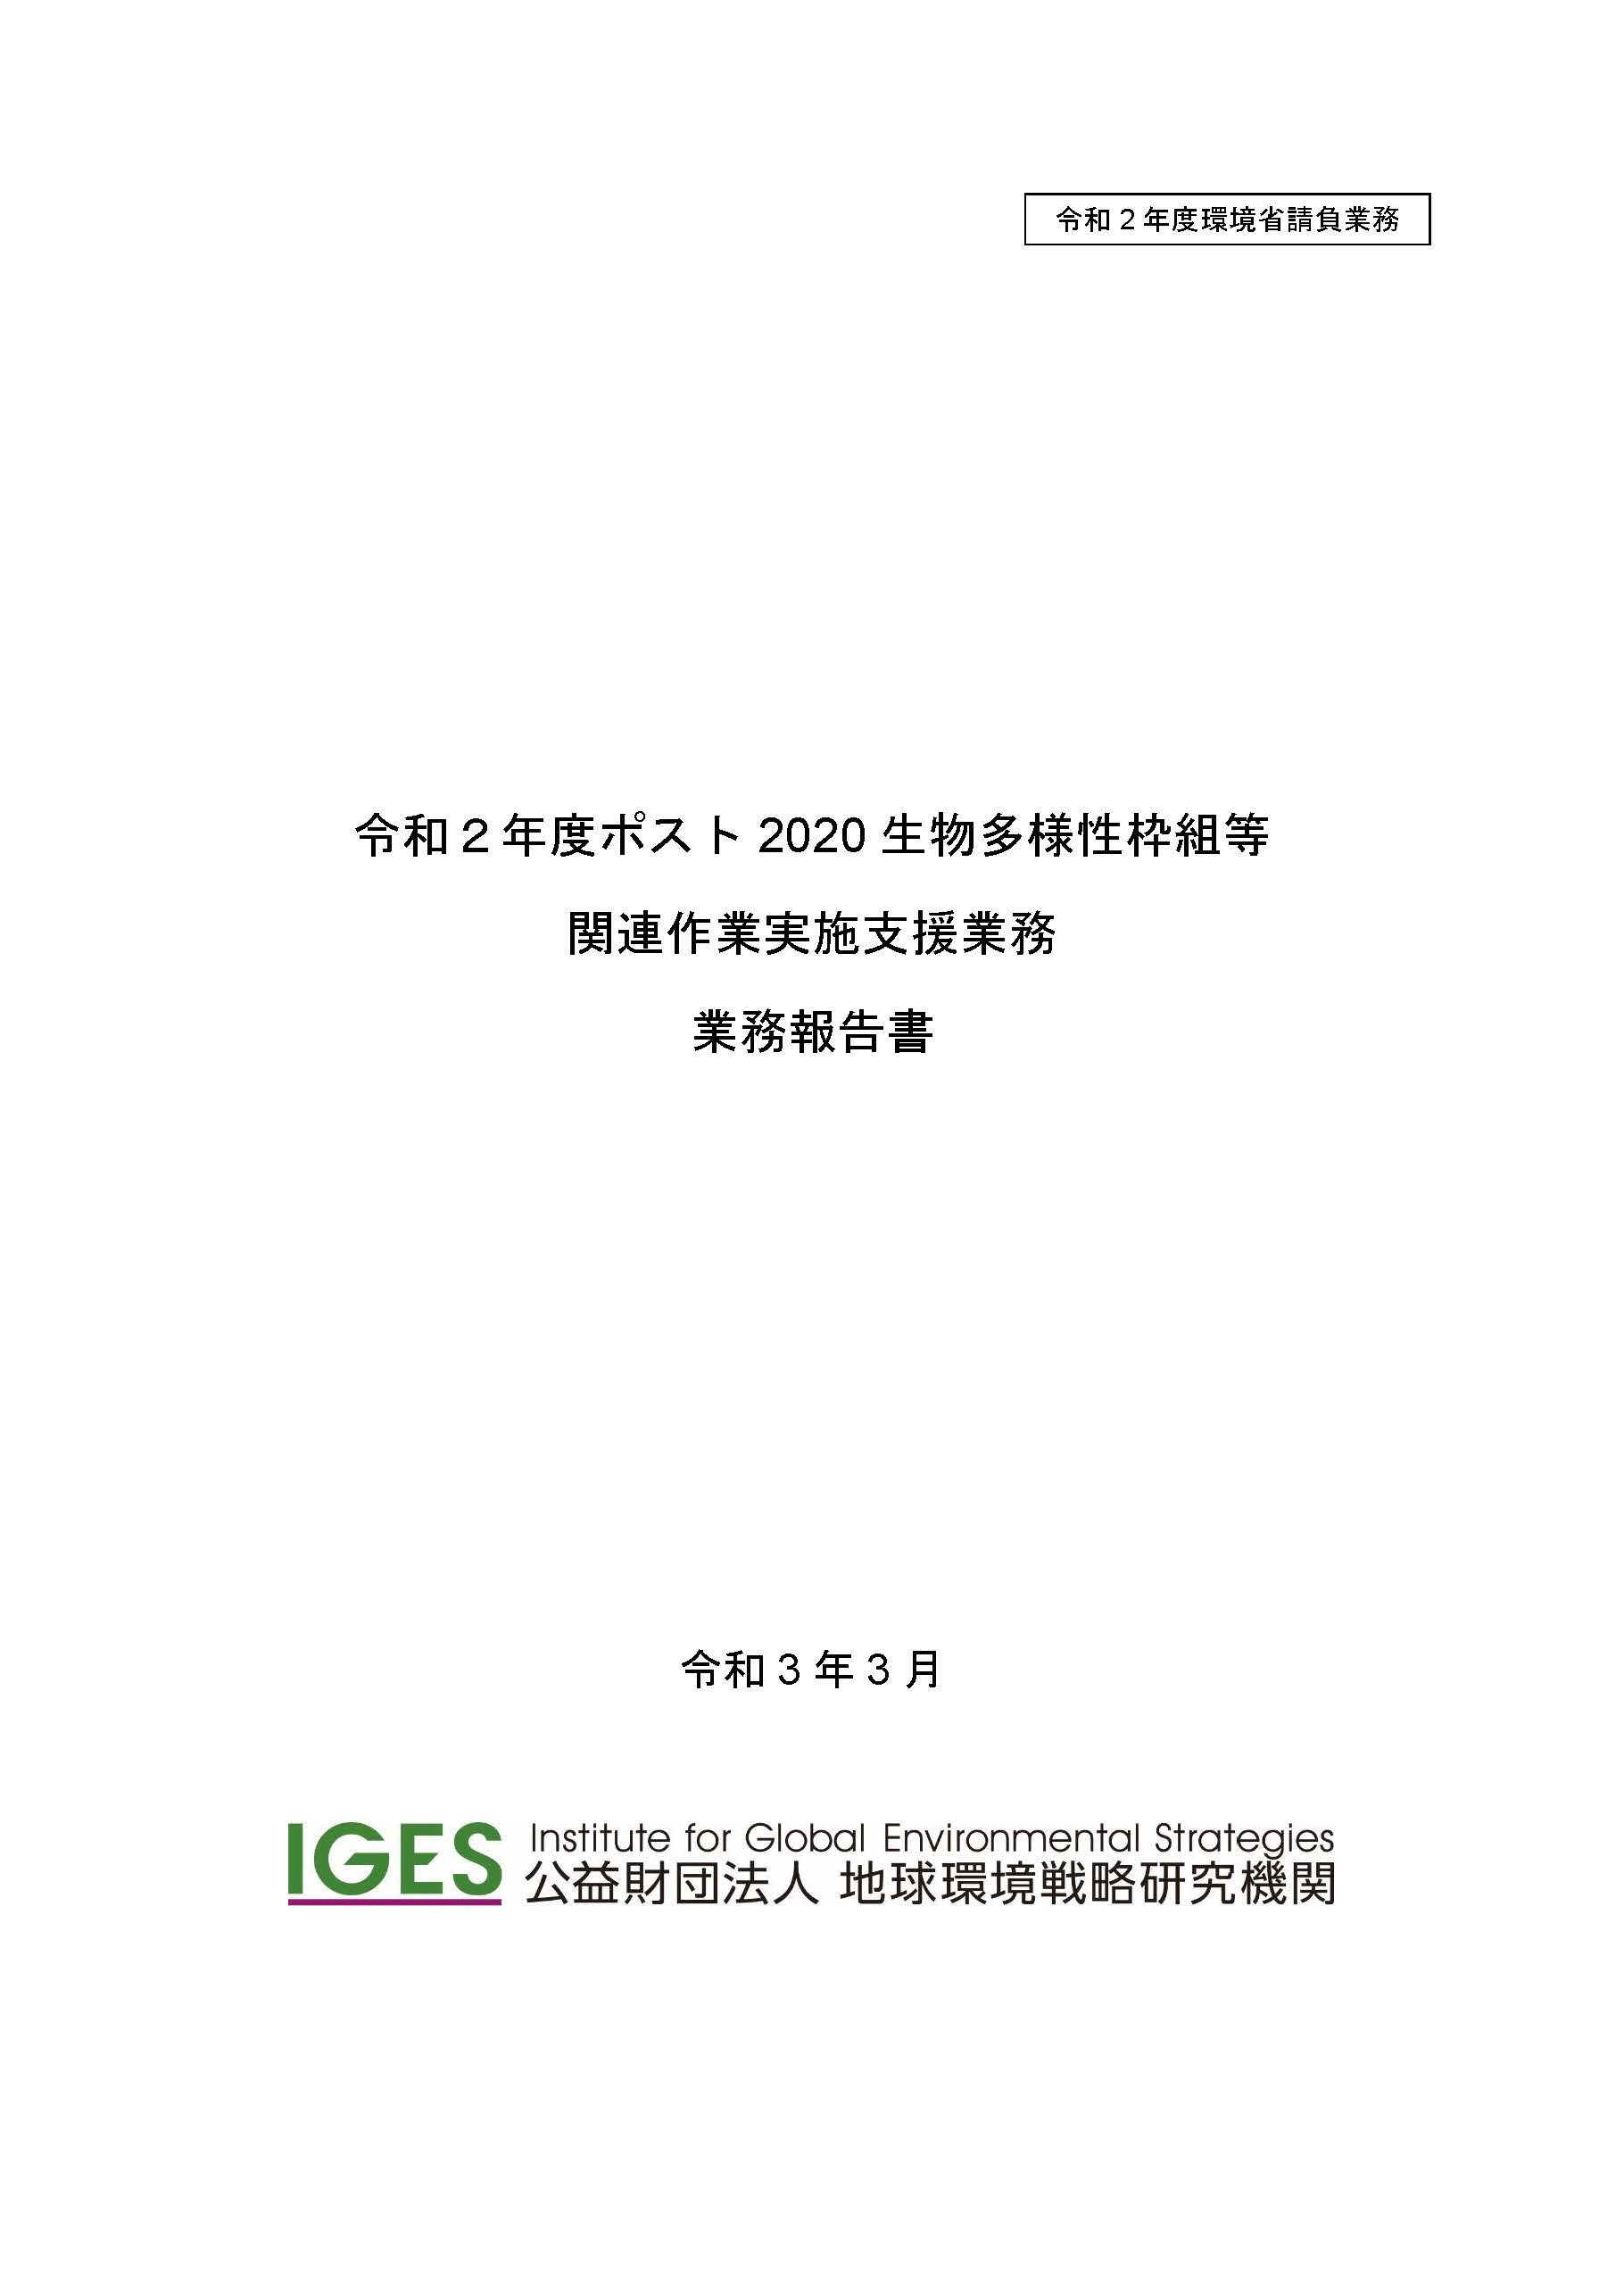 ipbes-japan-fy2020-commissioned-report-cover